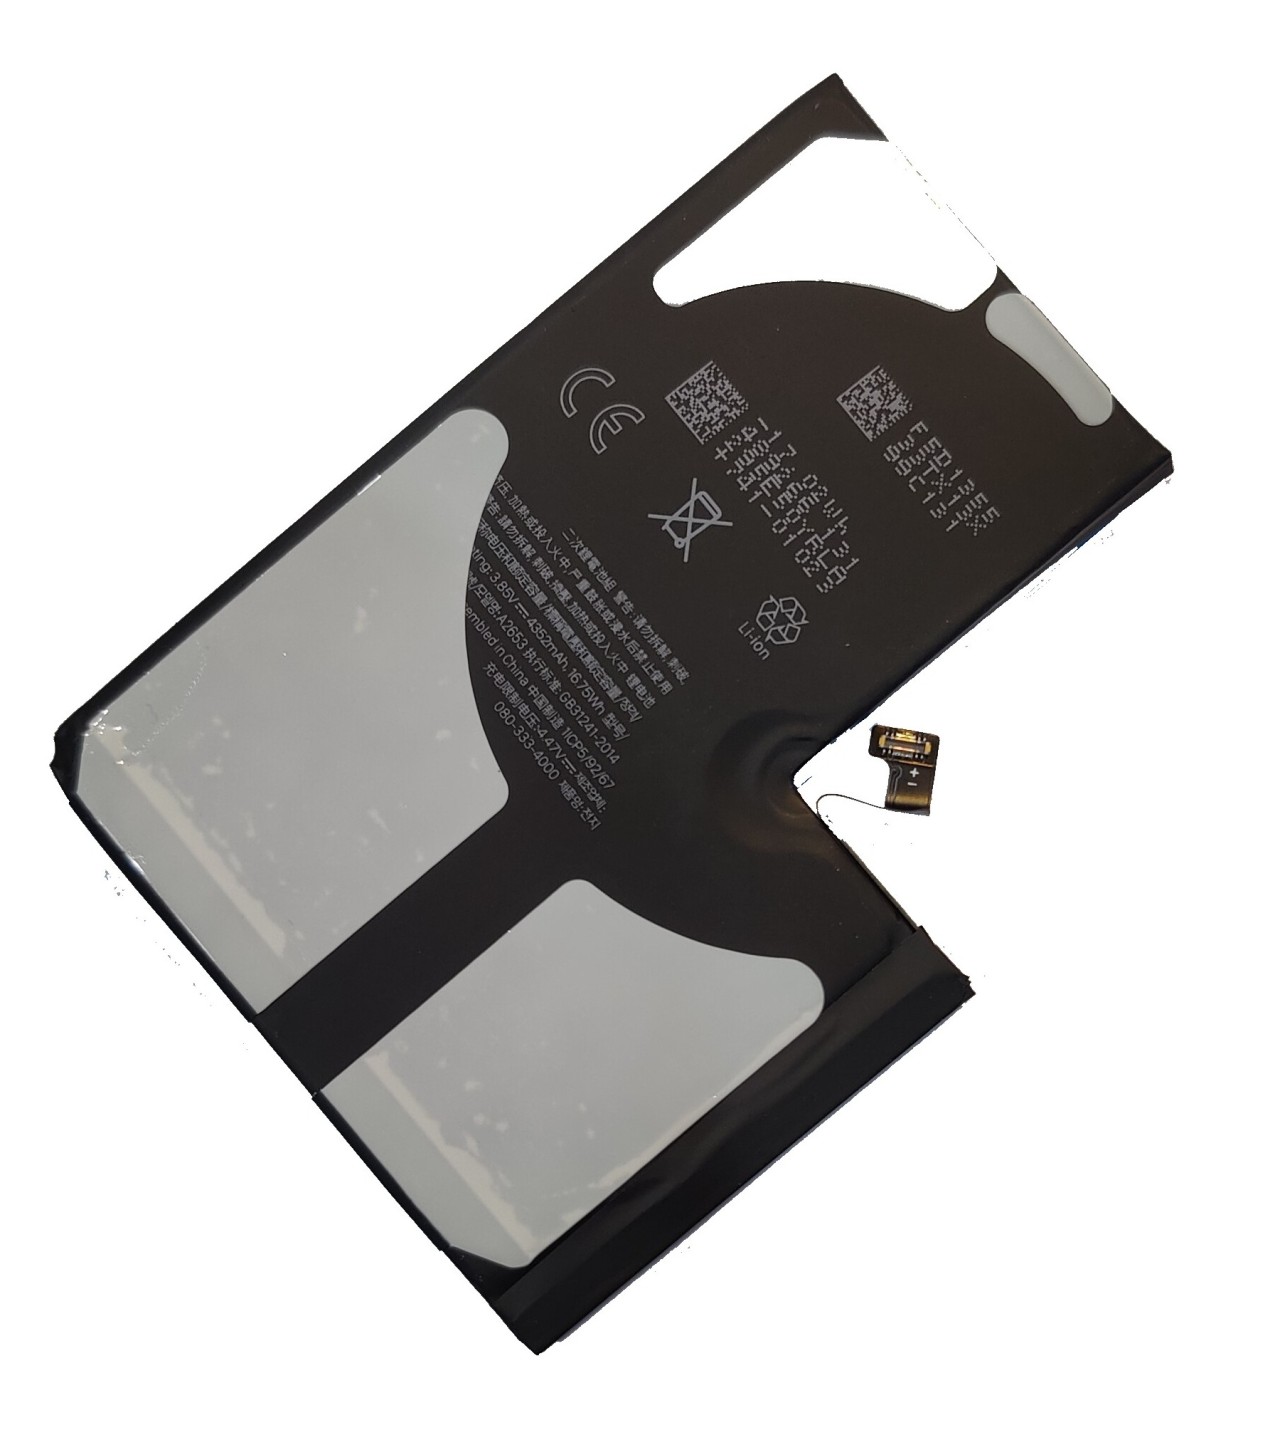 New Original iPhone 13 Pro Max Battery For Apple iPhone 13 Pro Max A2653 4352mAh